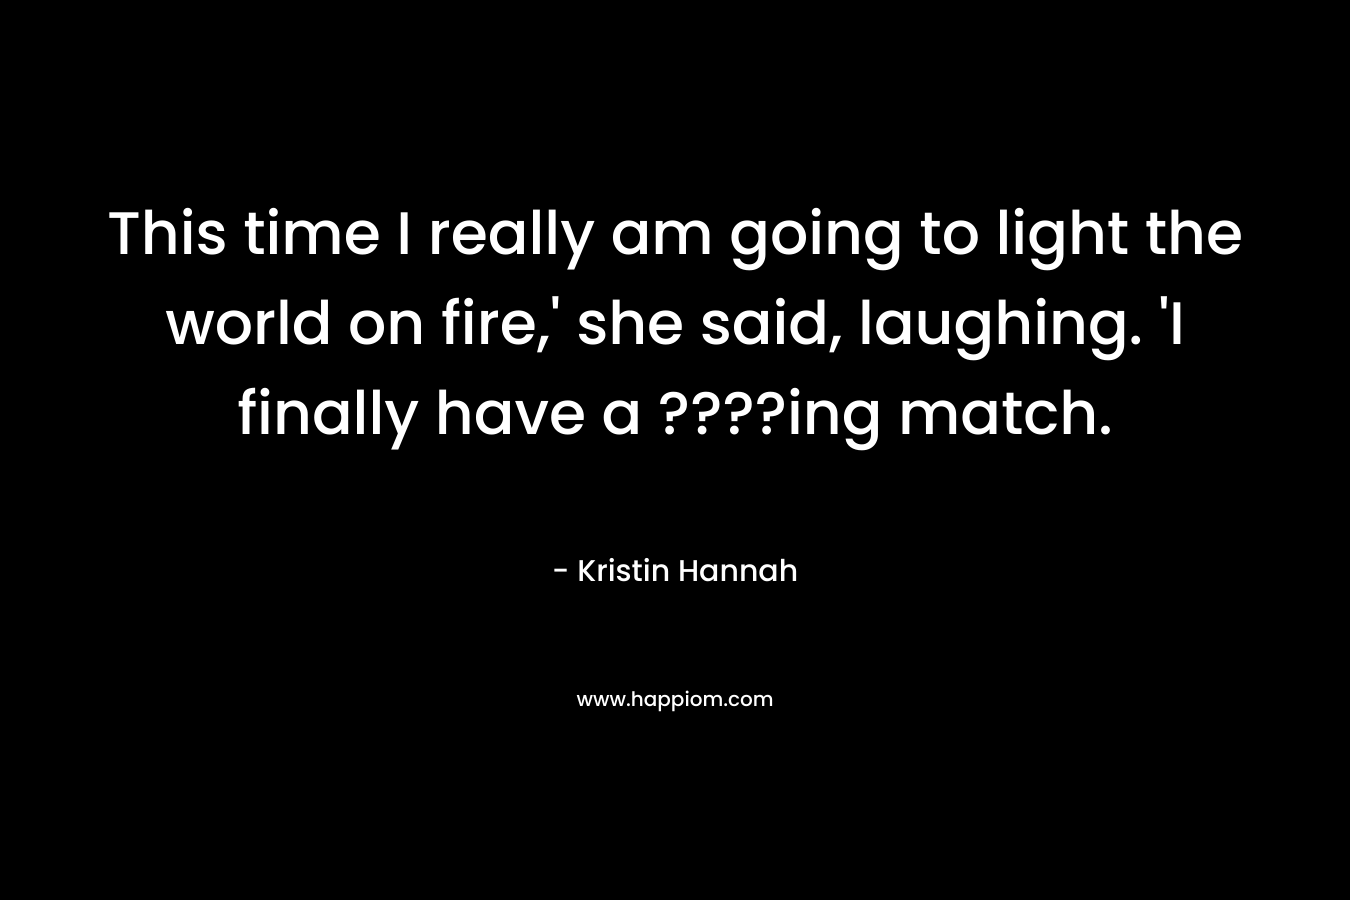 This time I really am going to light the world on fire,' she said, laughing. 'I finally have a ????ing match.